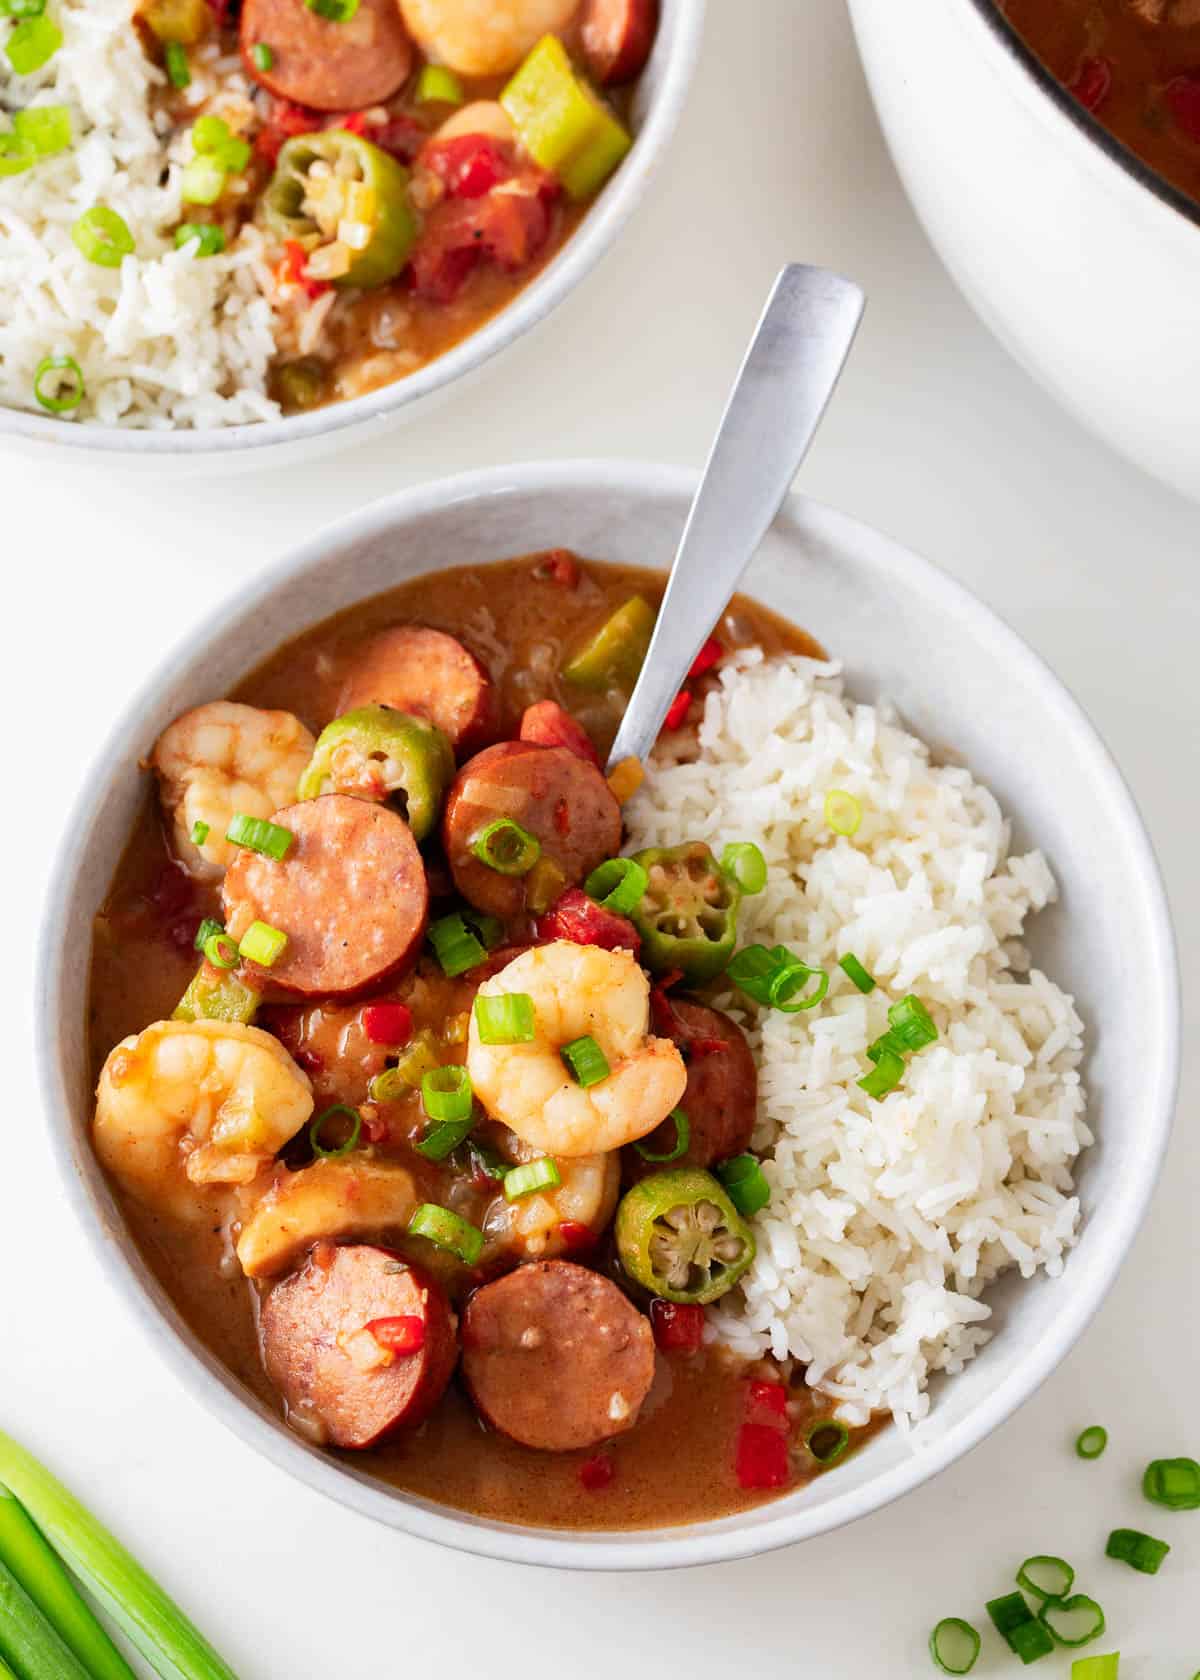 Serving New Orleans gumbo with rice in a white bowl.